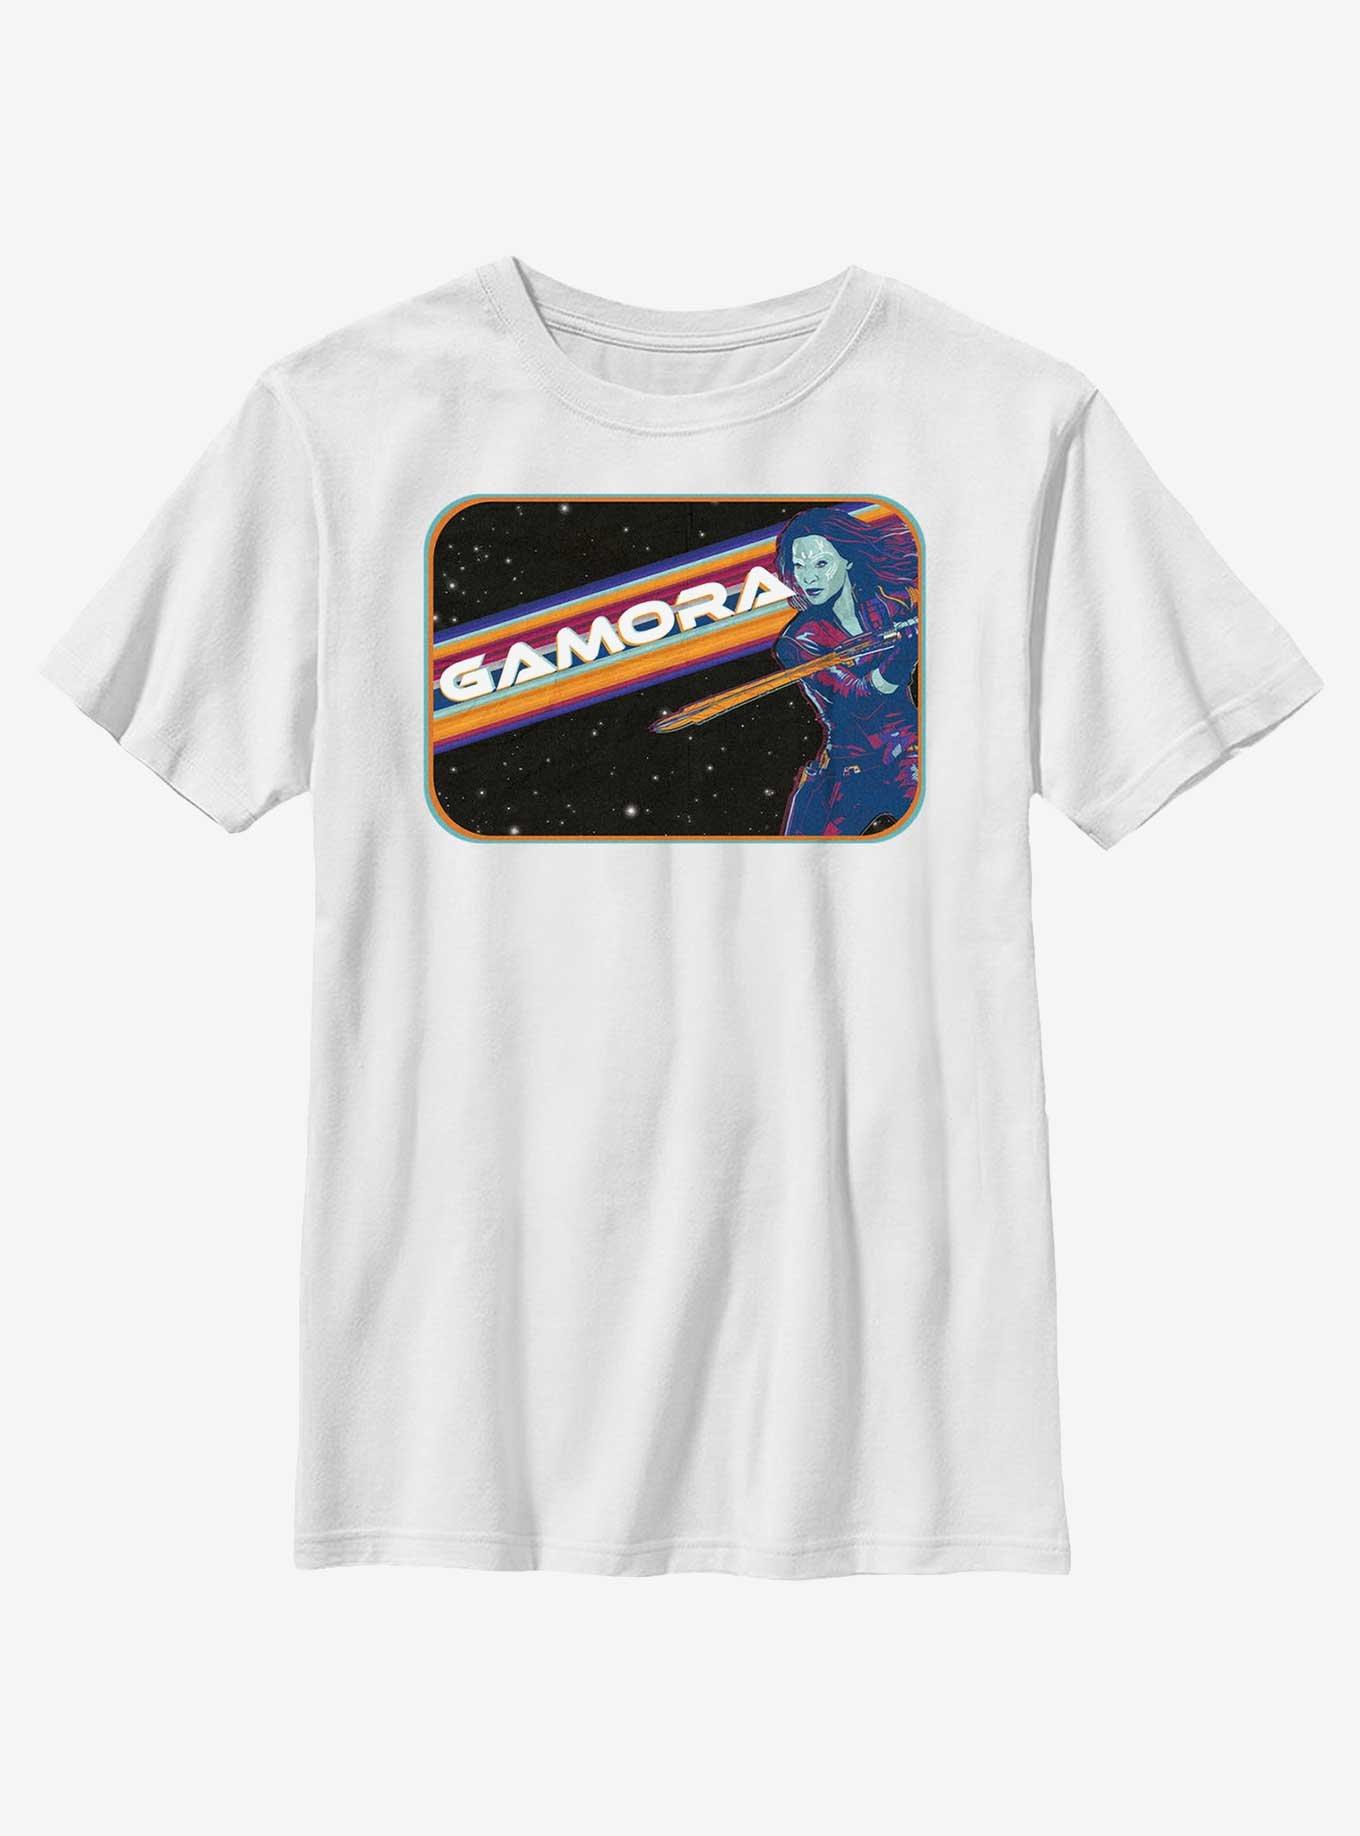 Marvel Guardians of the Galaxy Vol. 3 Gamora Space Badge Youth T-Shirt, WHITE, hi-res